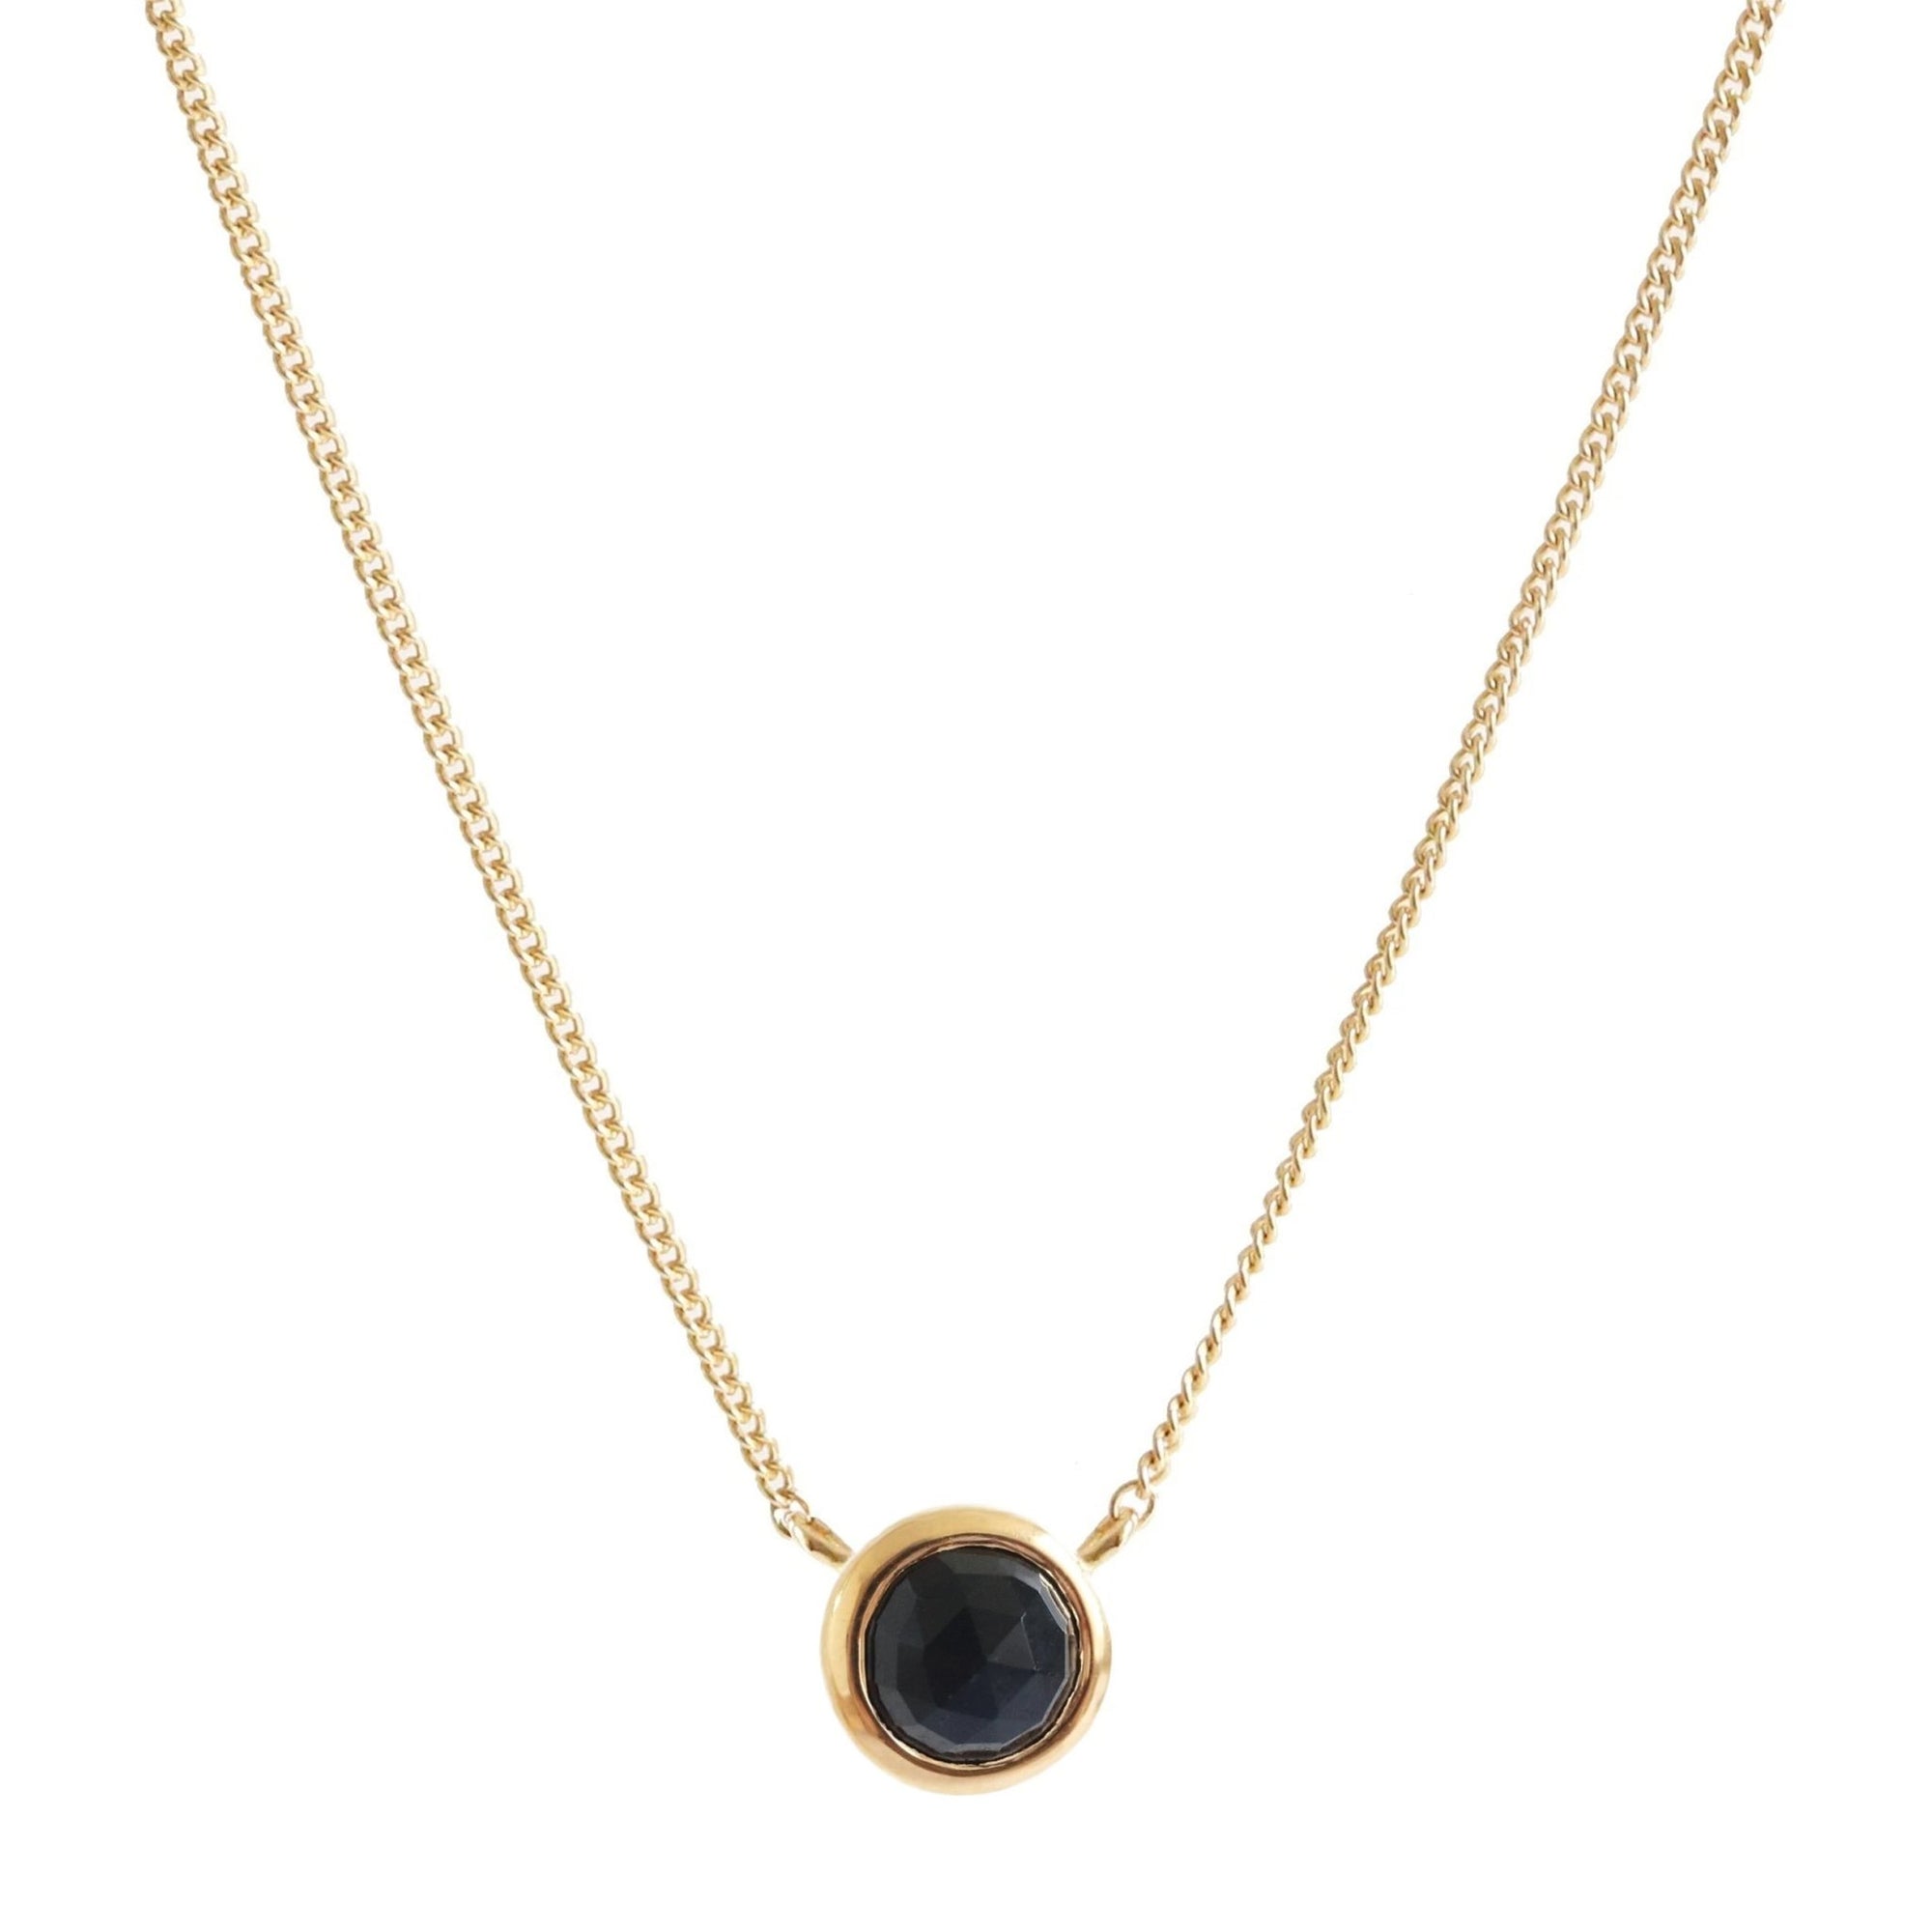 DAINTY LEGACY NECKLACE - BLACK ONYX & GOLD - SO PRETTY CARA COTTER